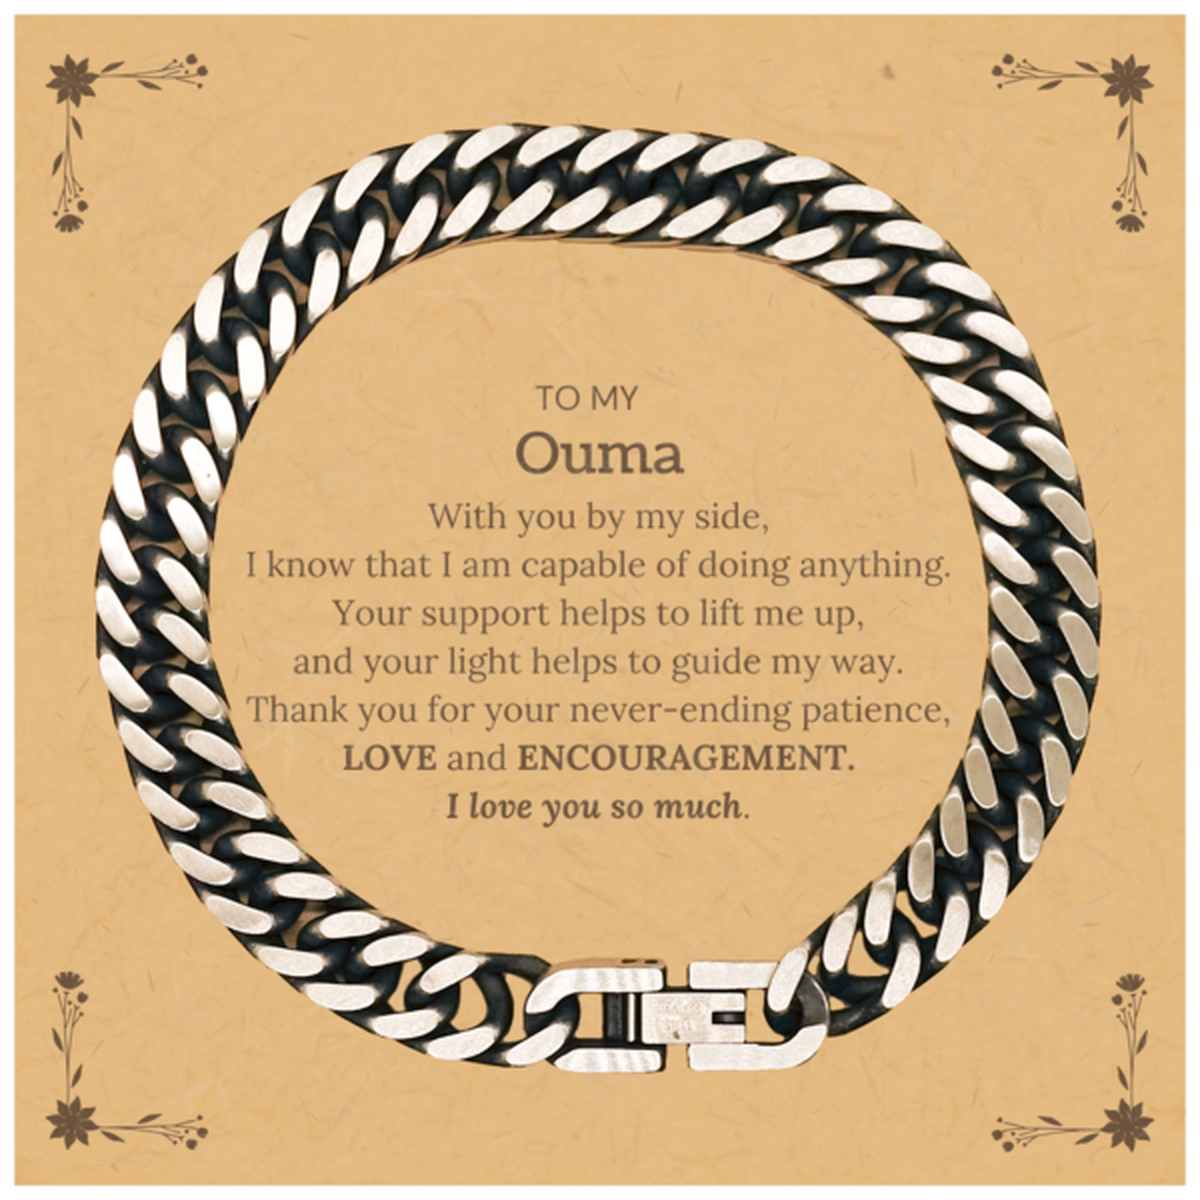 Appreciation Ouma Cuban Link Chain Bracelet Gifts, To My Ouma Birthday Christmas Wedding Keepsake Gifts for Ouma With you by my side, I know that I am capable of doing anything. I love you so much